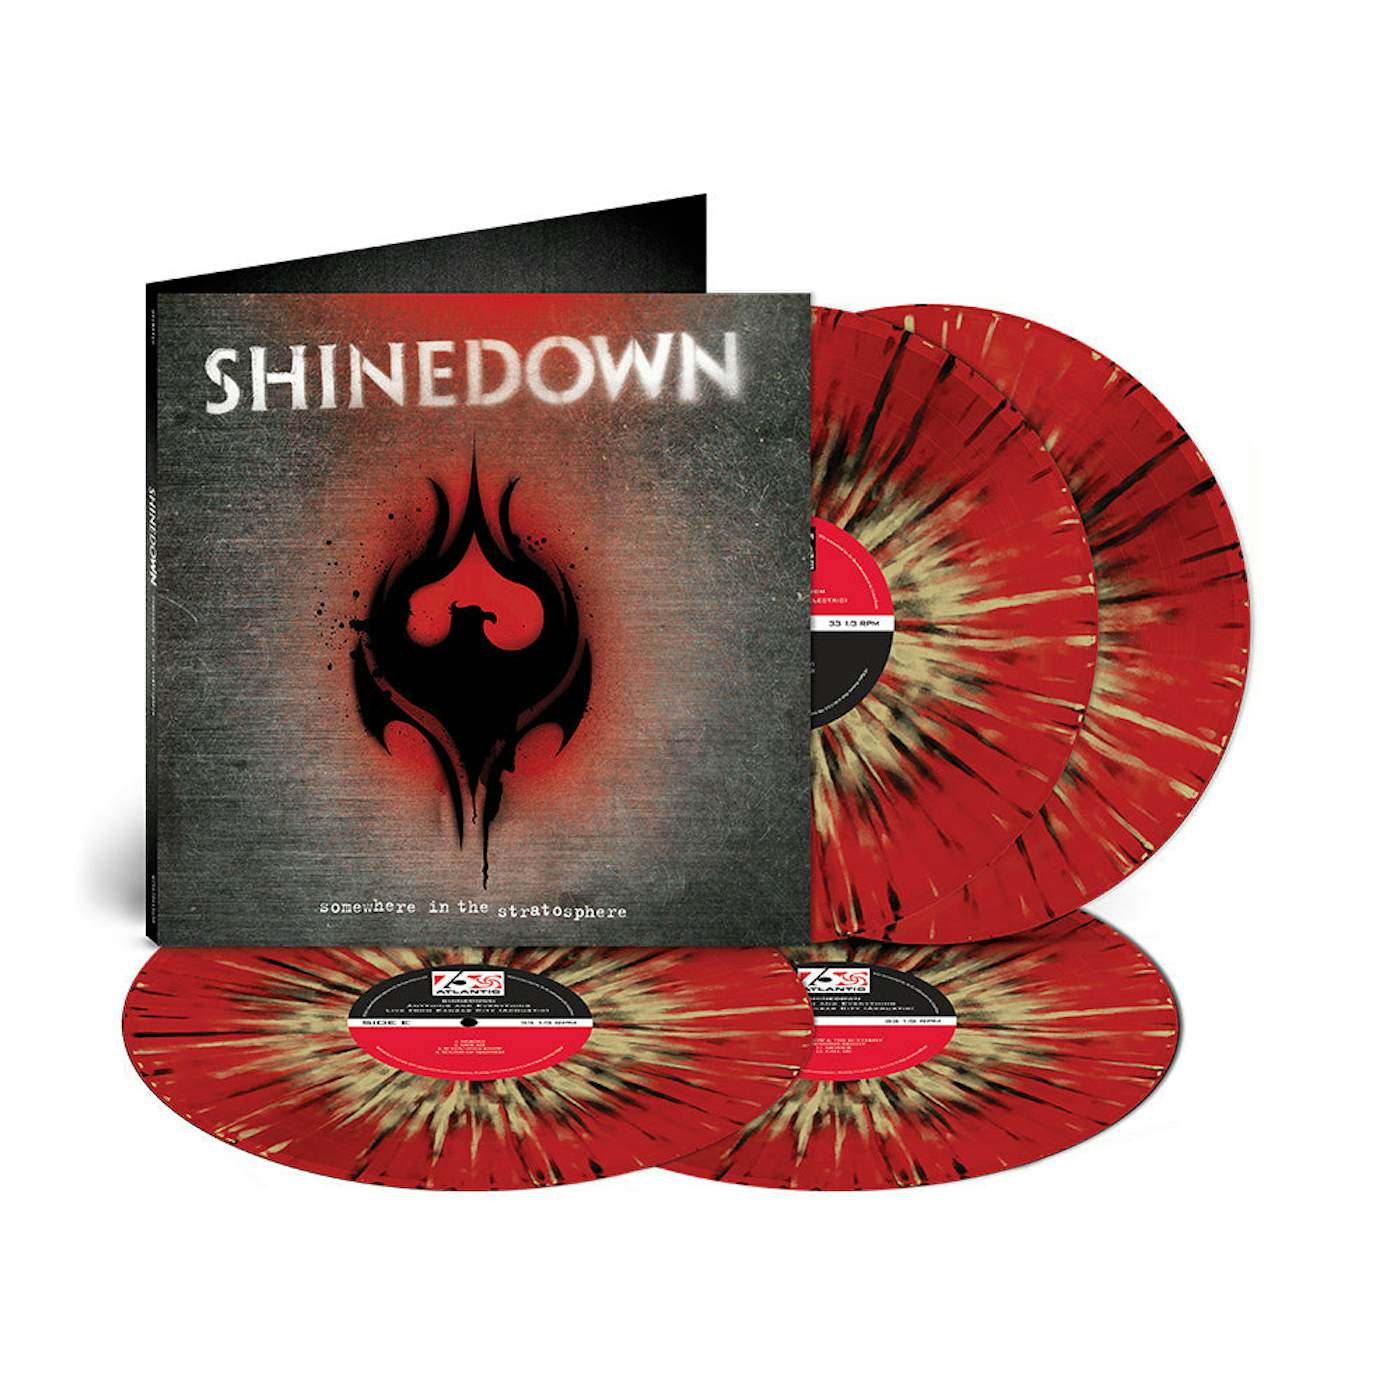 Shinedown Somewhere in the Stratosphere 4LP Vinyl